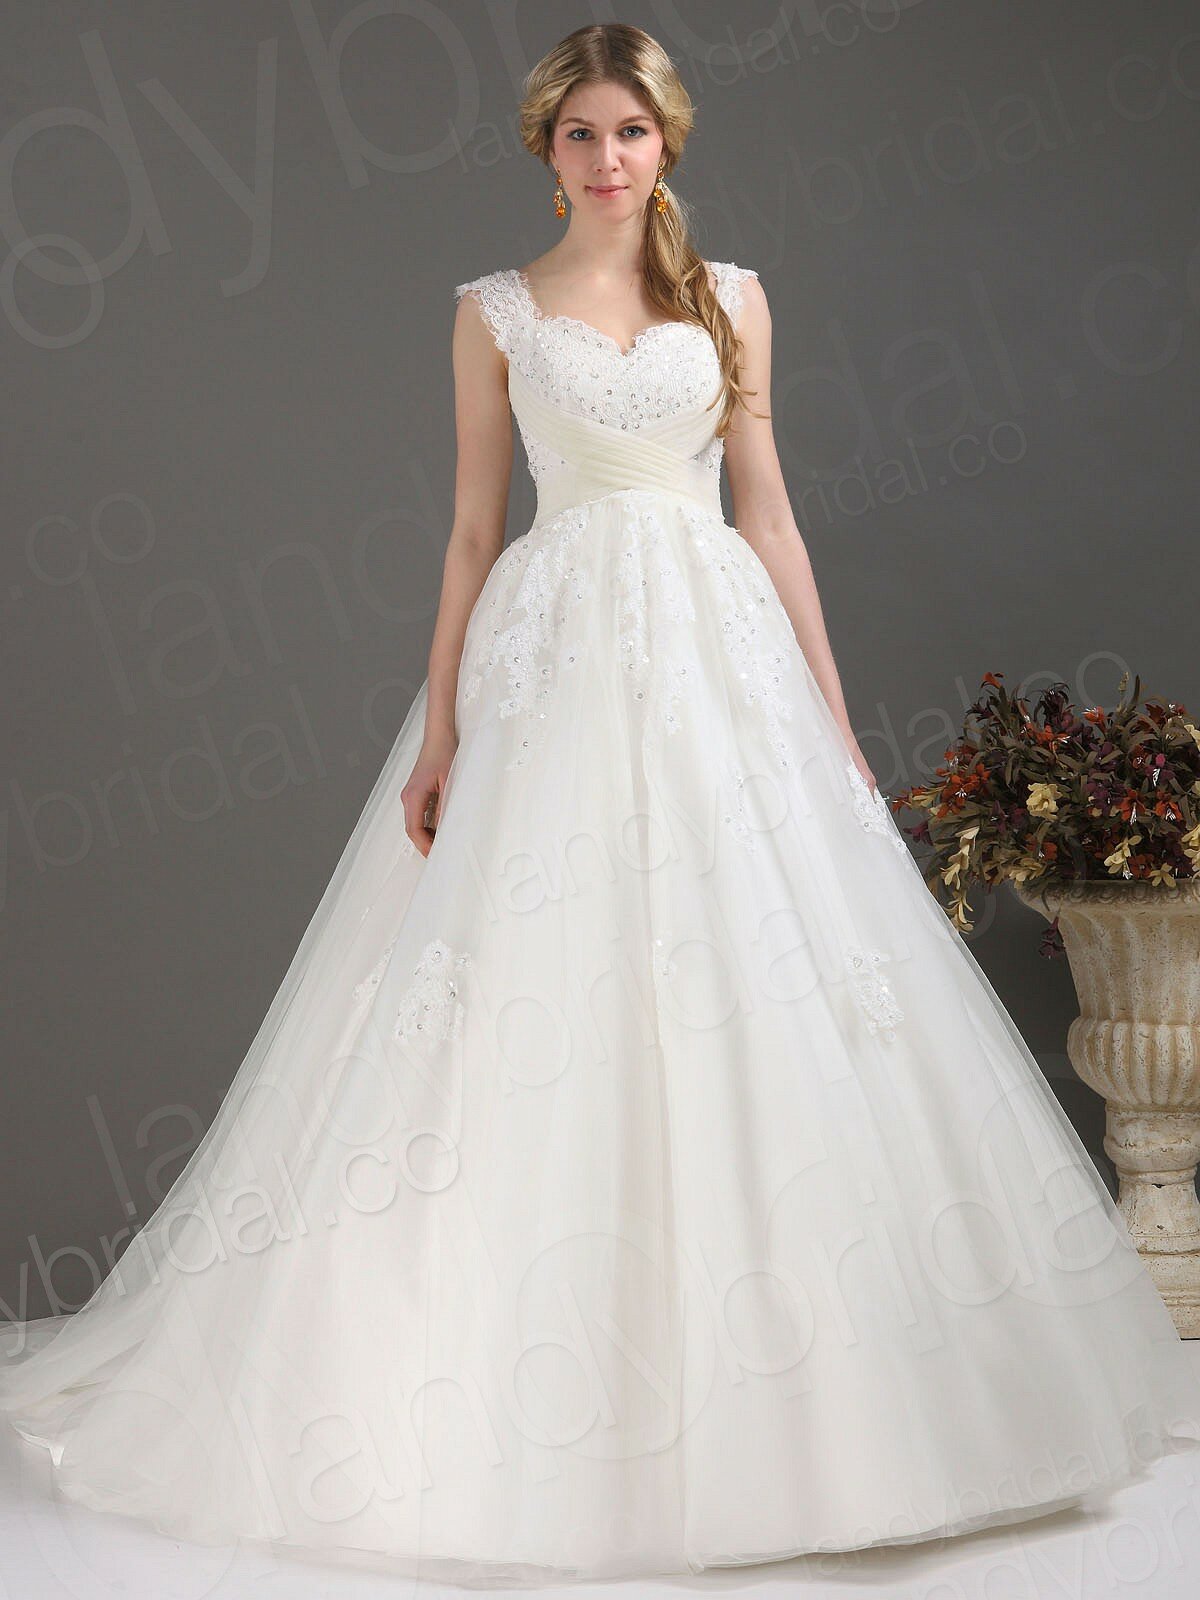 A line wedding dresses with straps Photo - 5